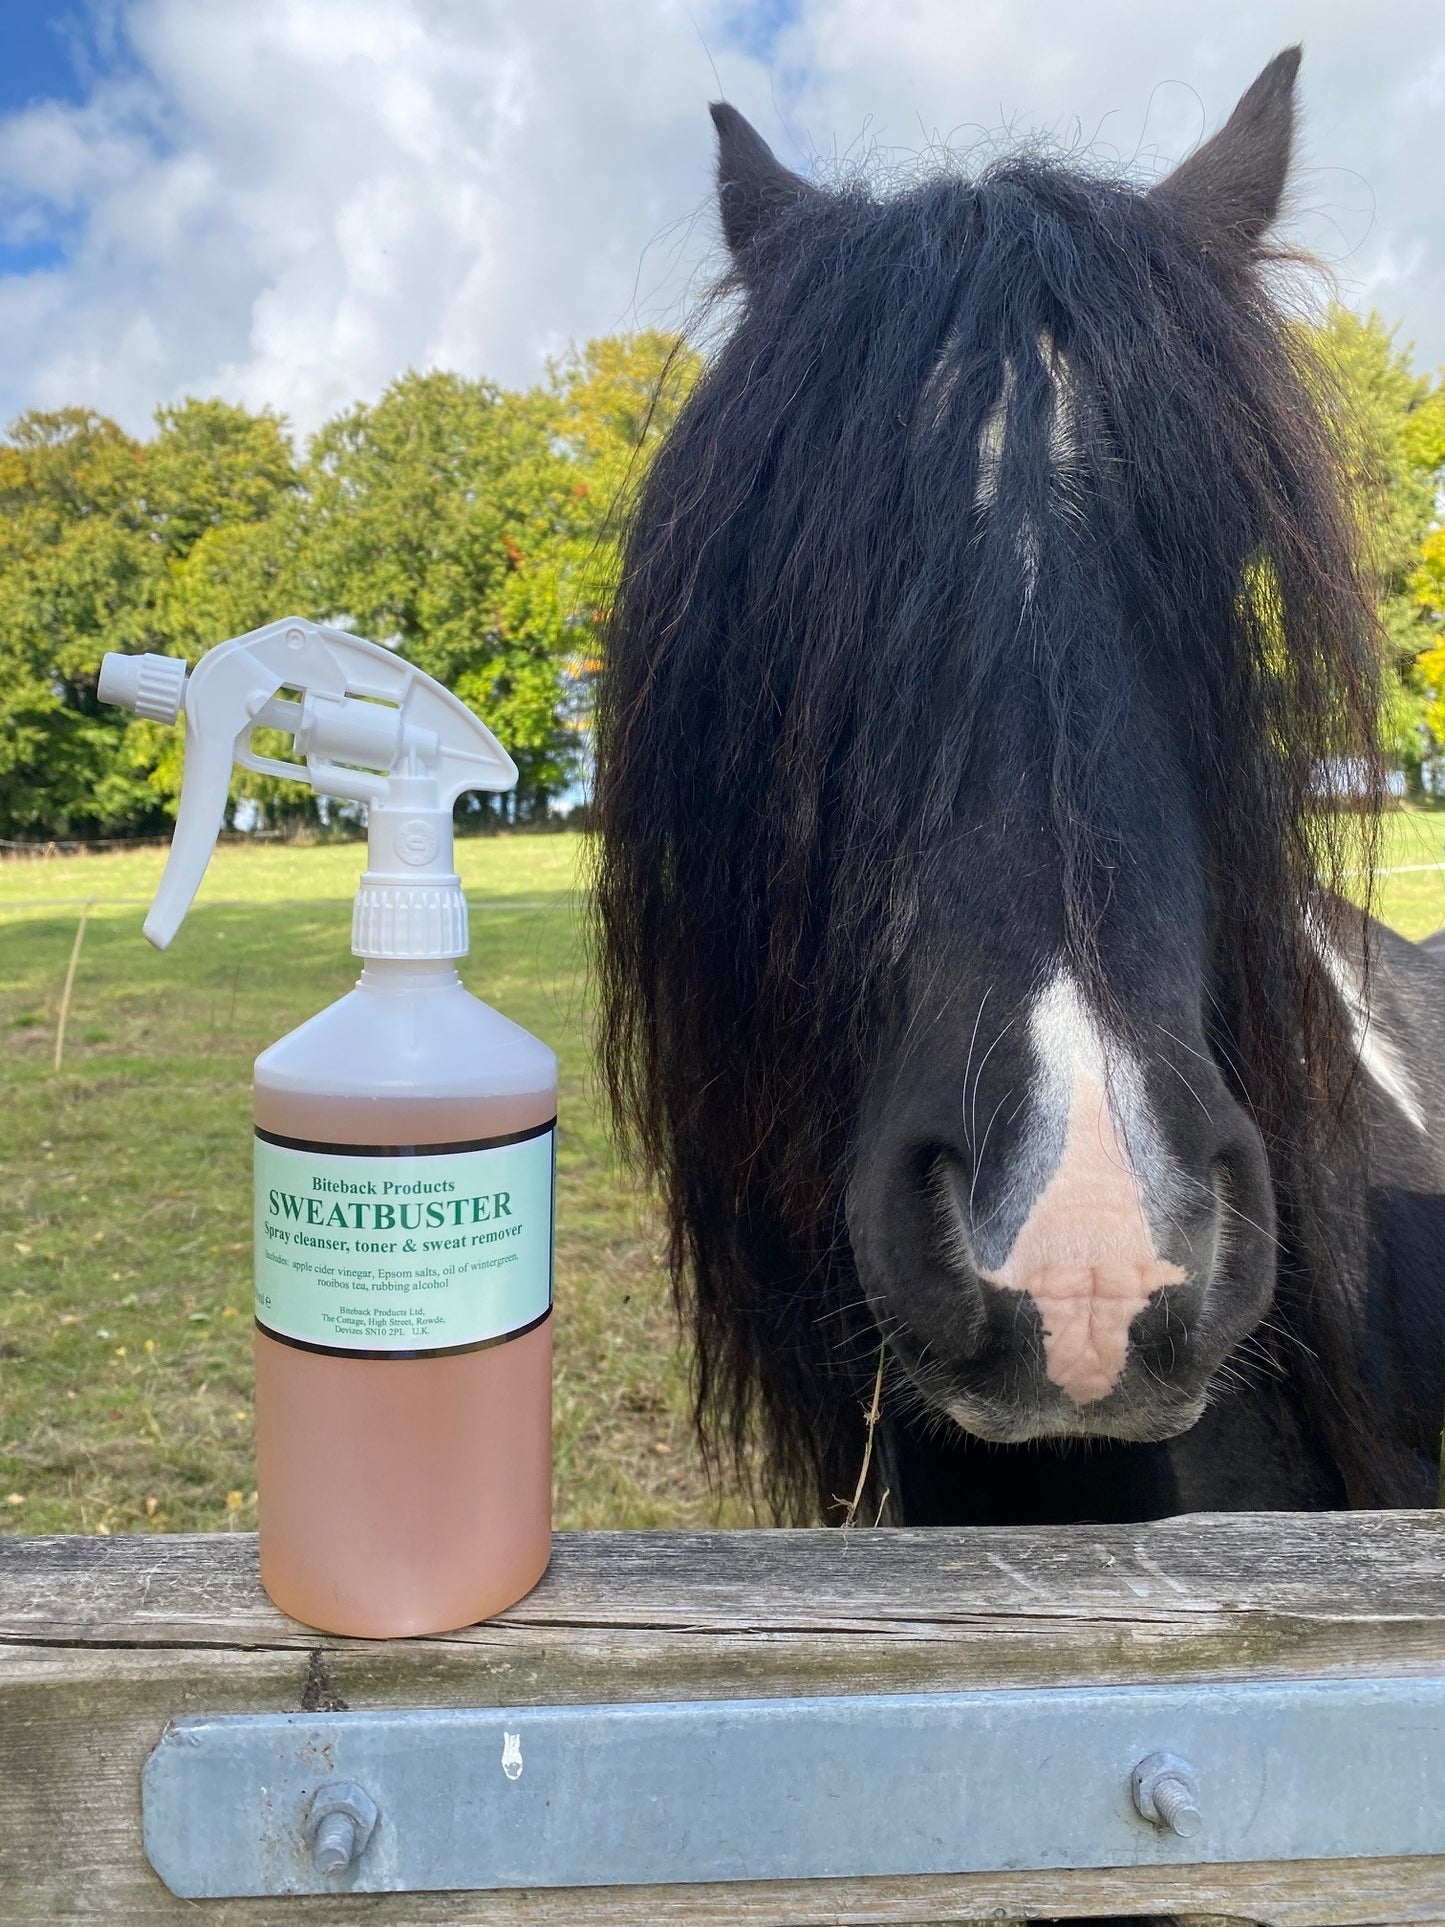 Sweatbuster grooming spray gets your horse dry very quickly.